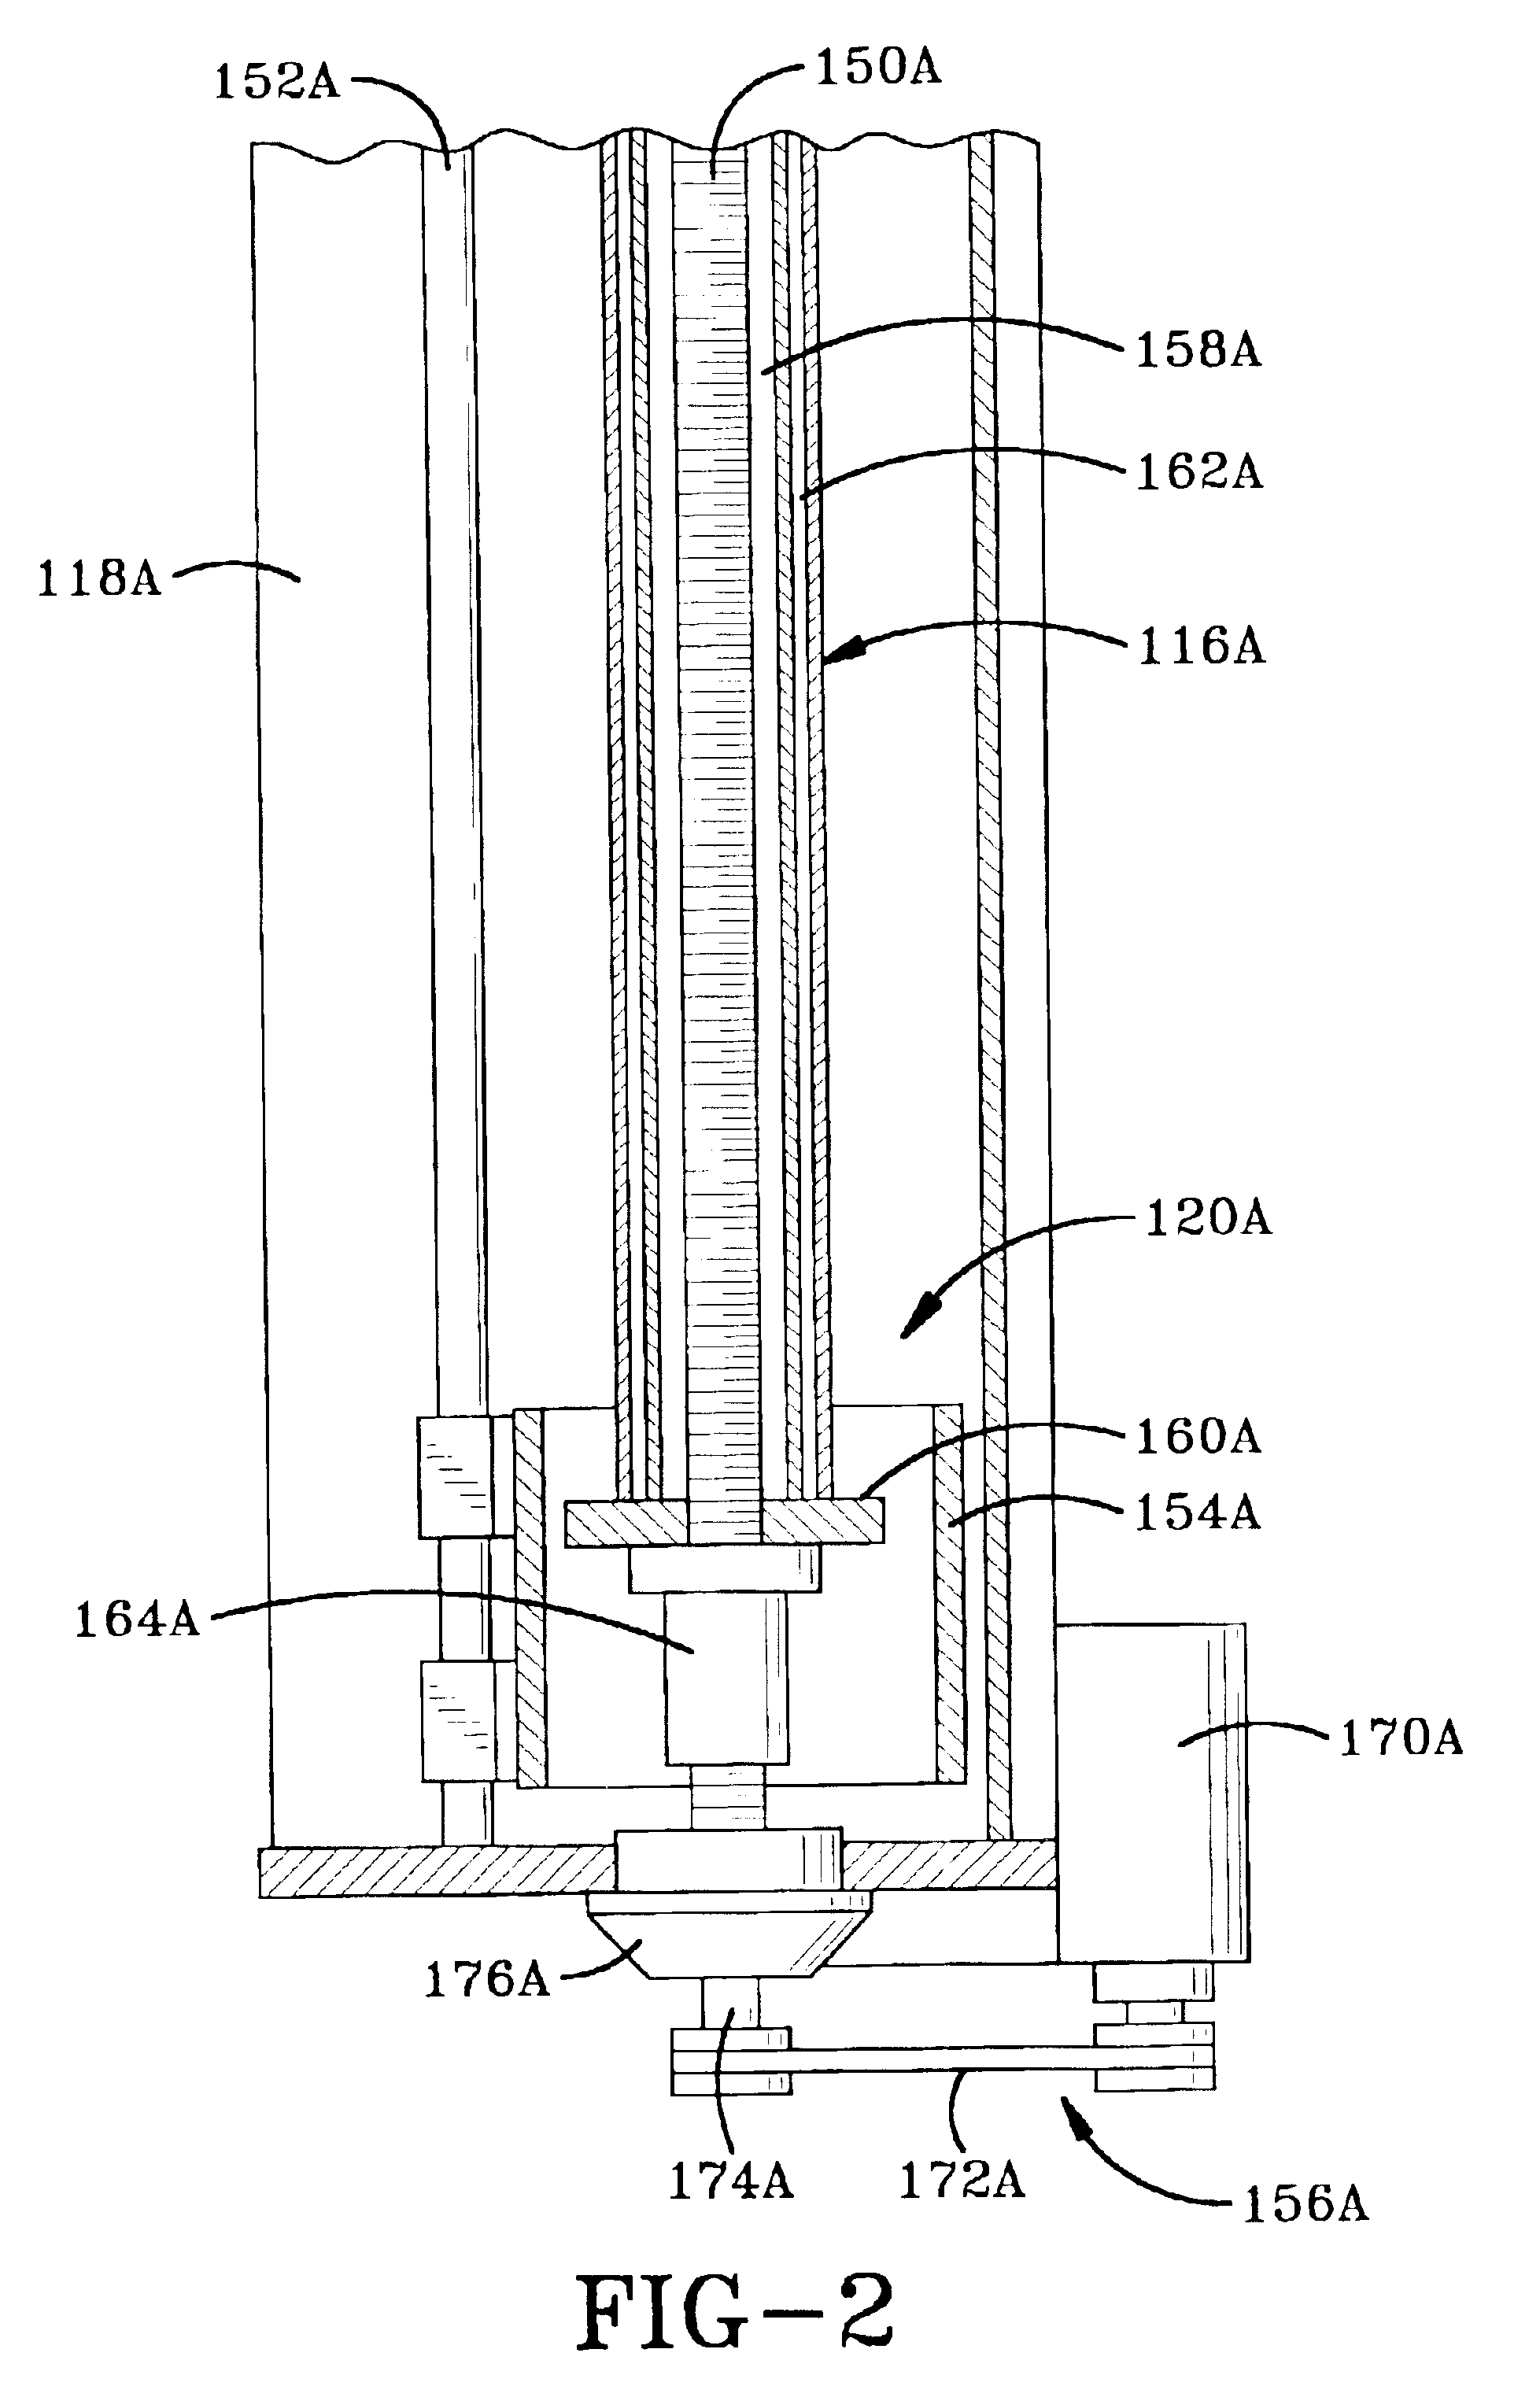 Method and apparatus for alternating pouring from common hearth in plasma furnace